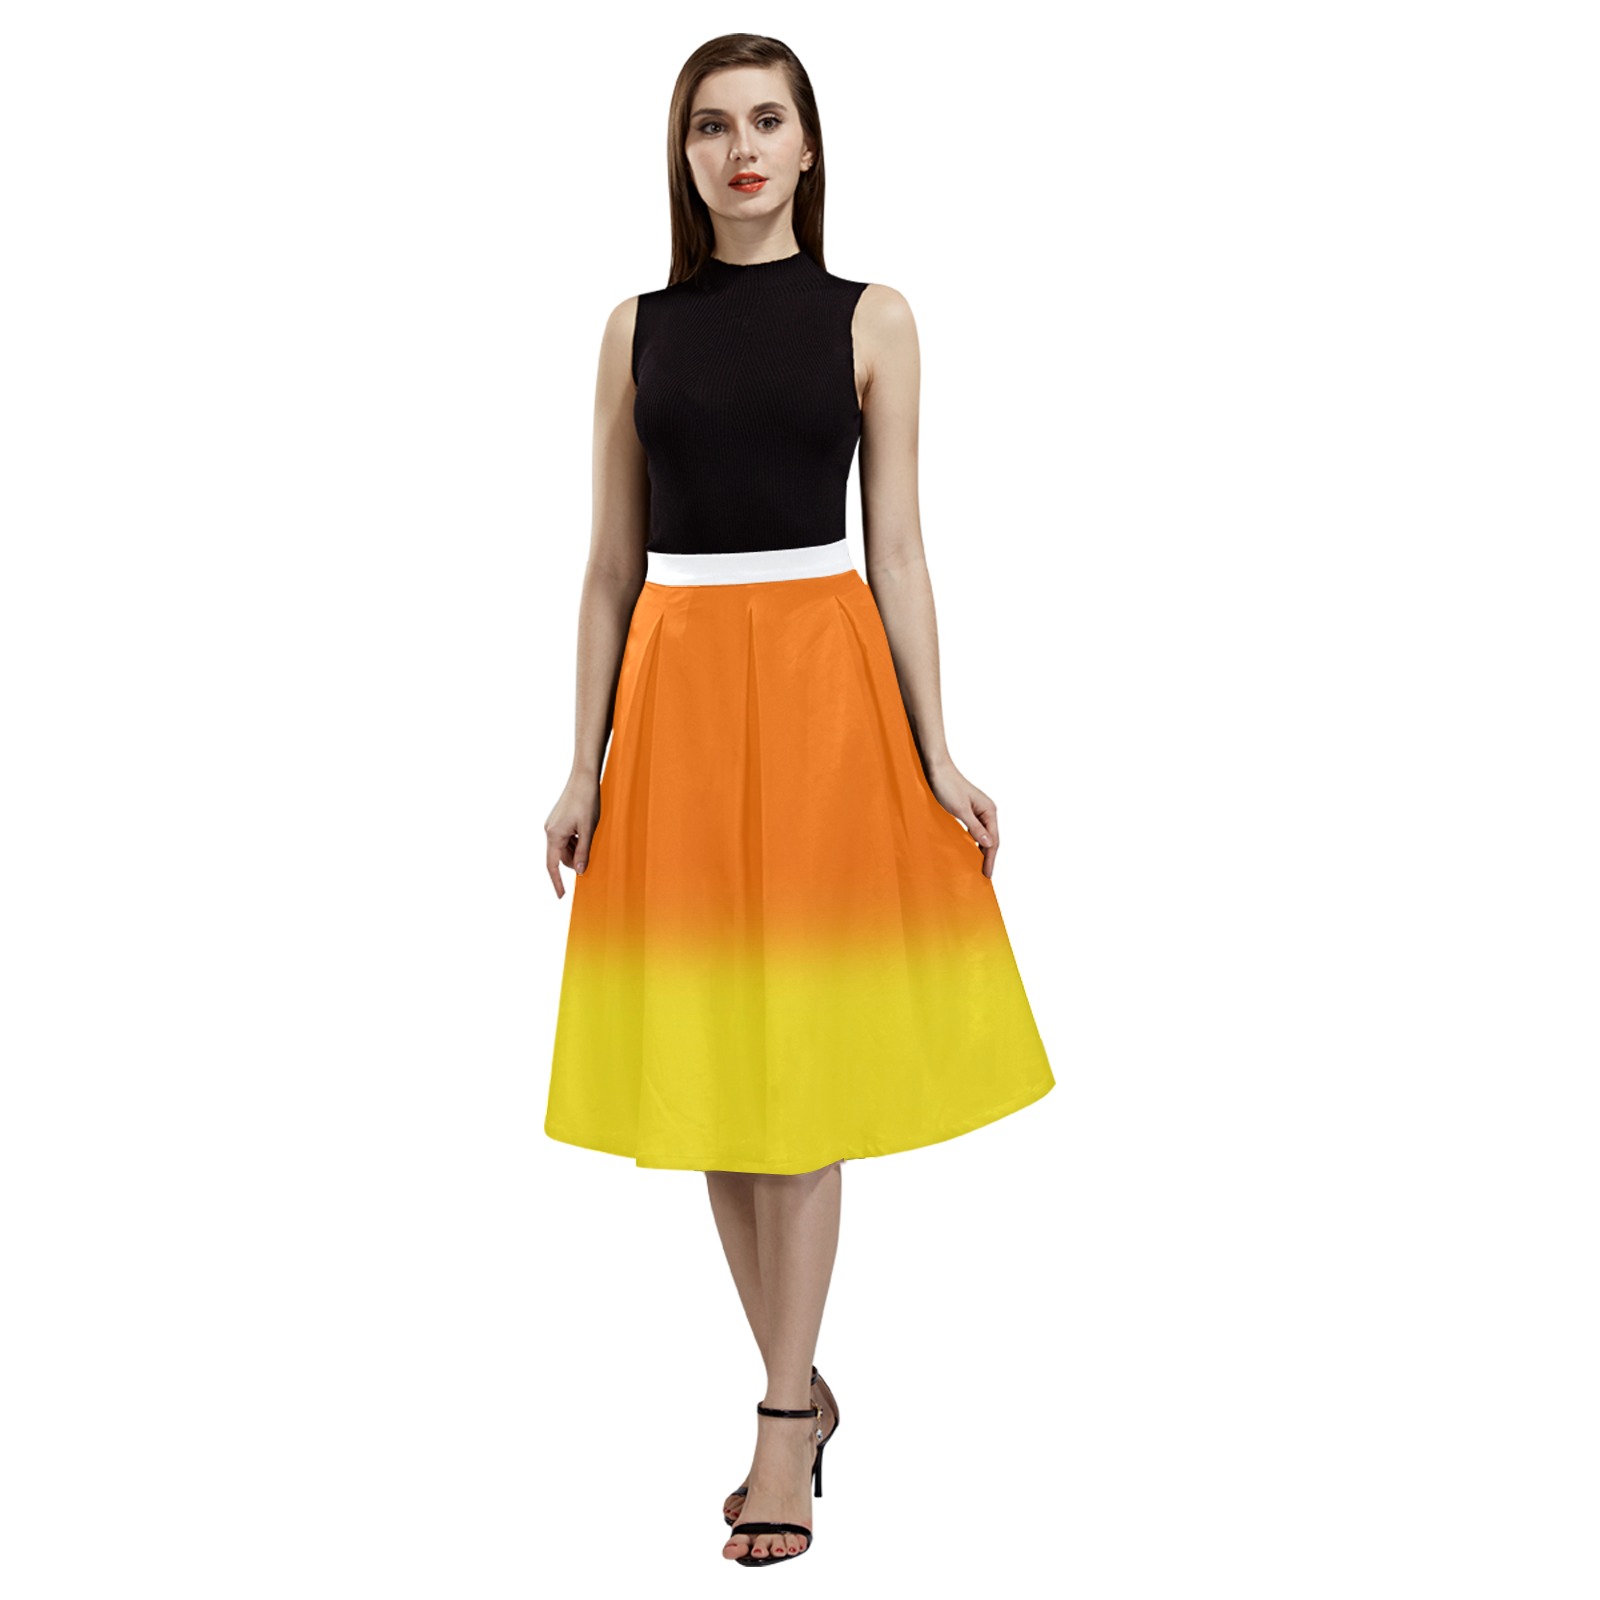 Candy Corn Ombre Mnemosyne Women's Crepe Skirt (Model D16)